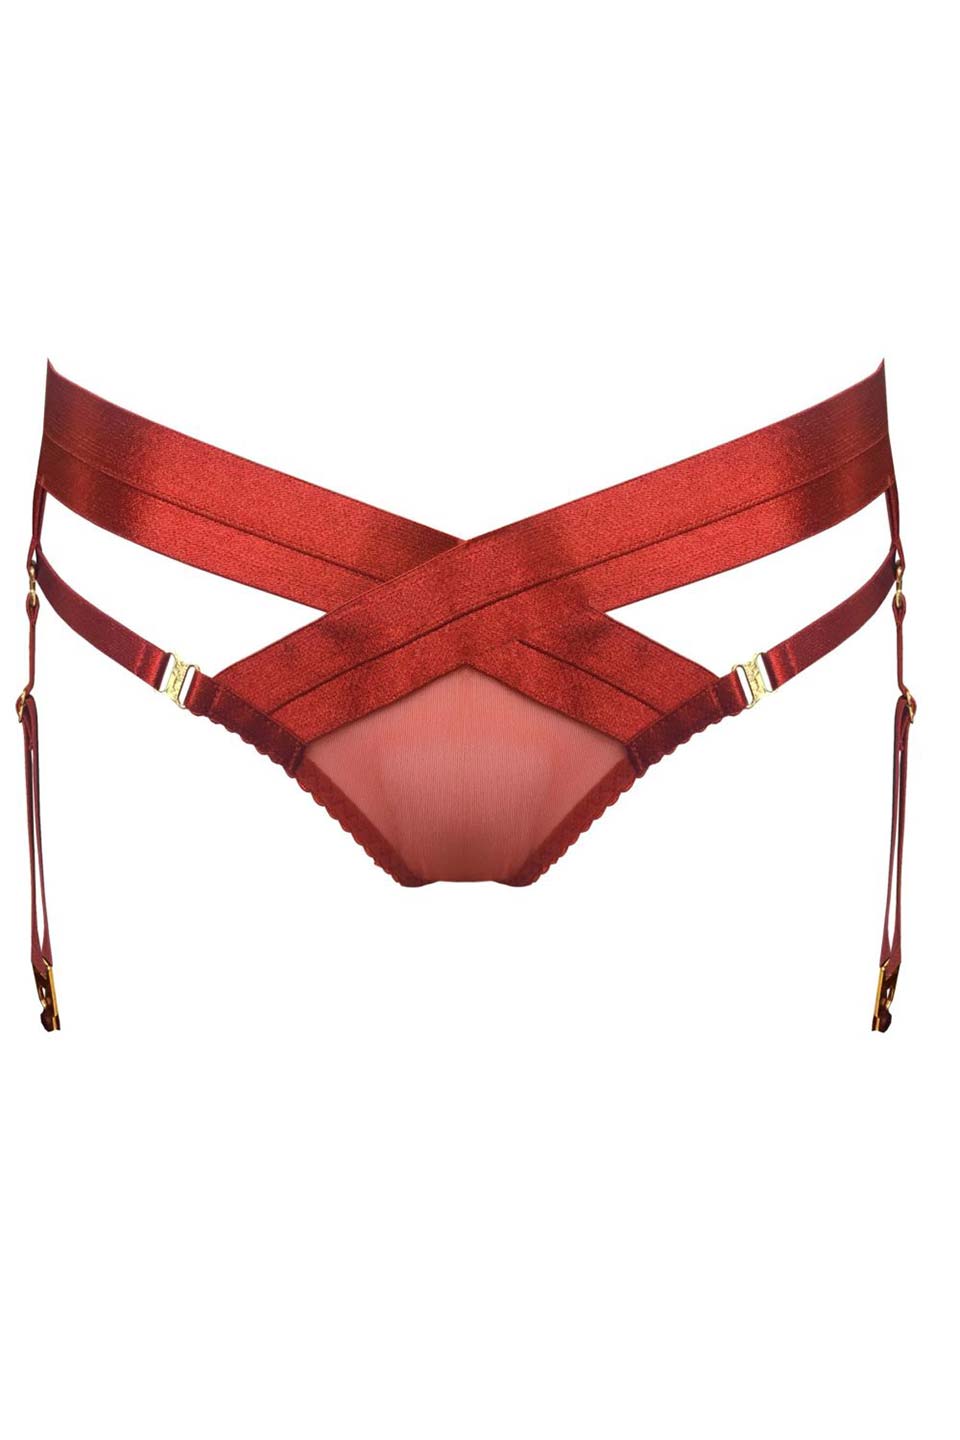 Atelier bordelle tomoe brief red front. Product gallery 1